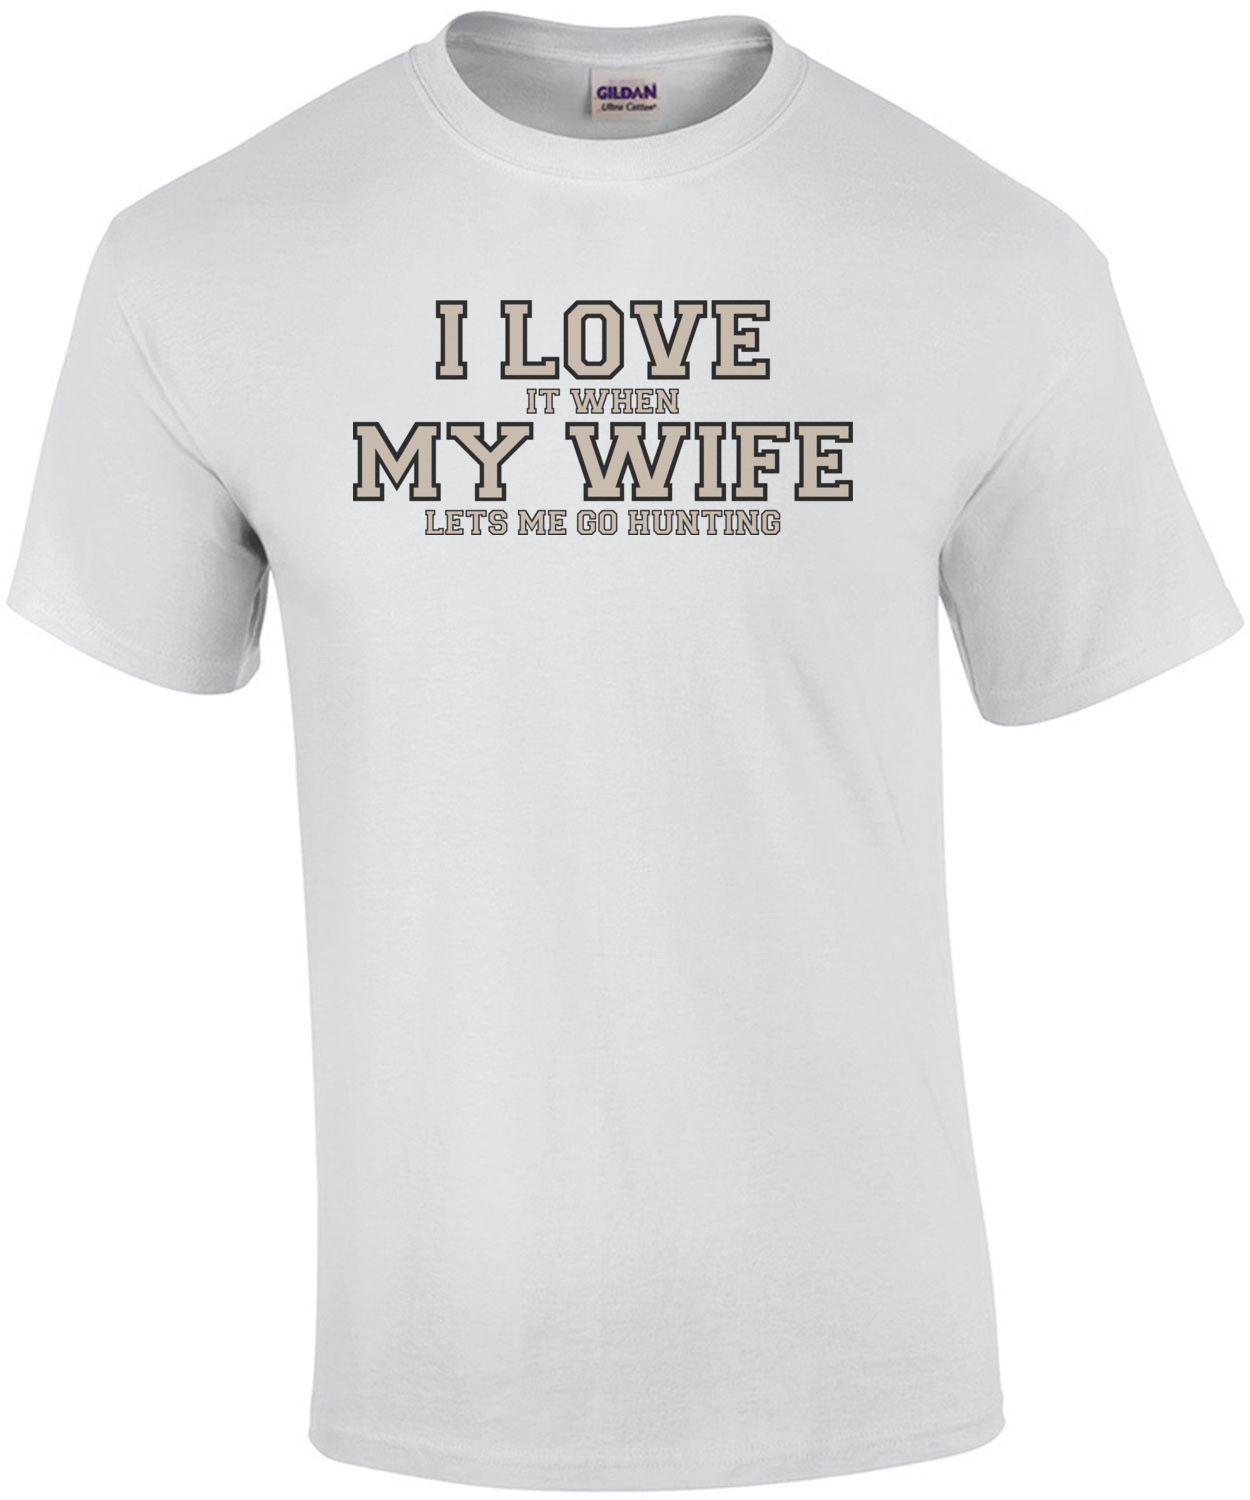 I love it when my wife lets me go hunting - Funny T-Shirt